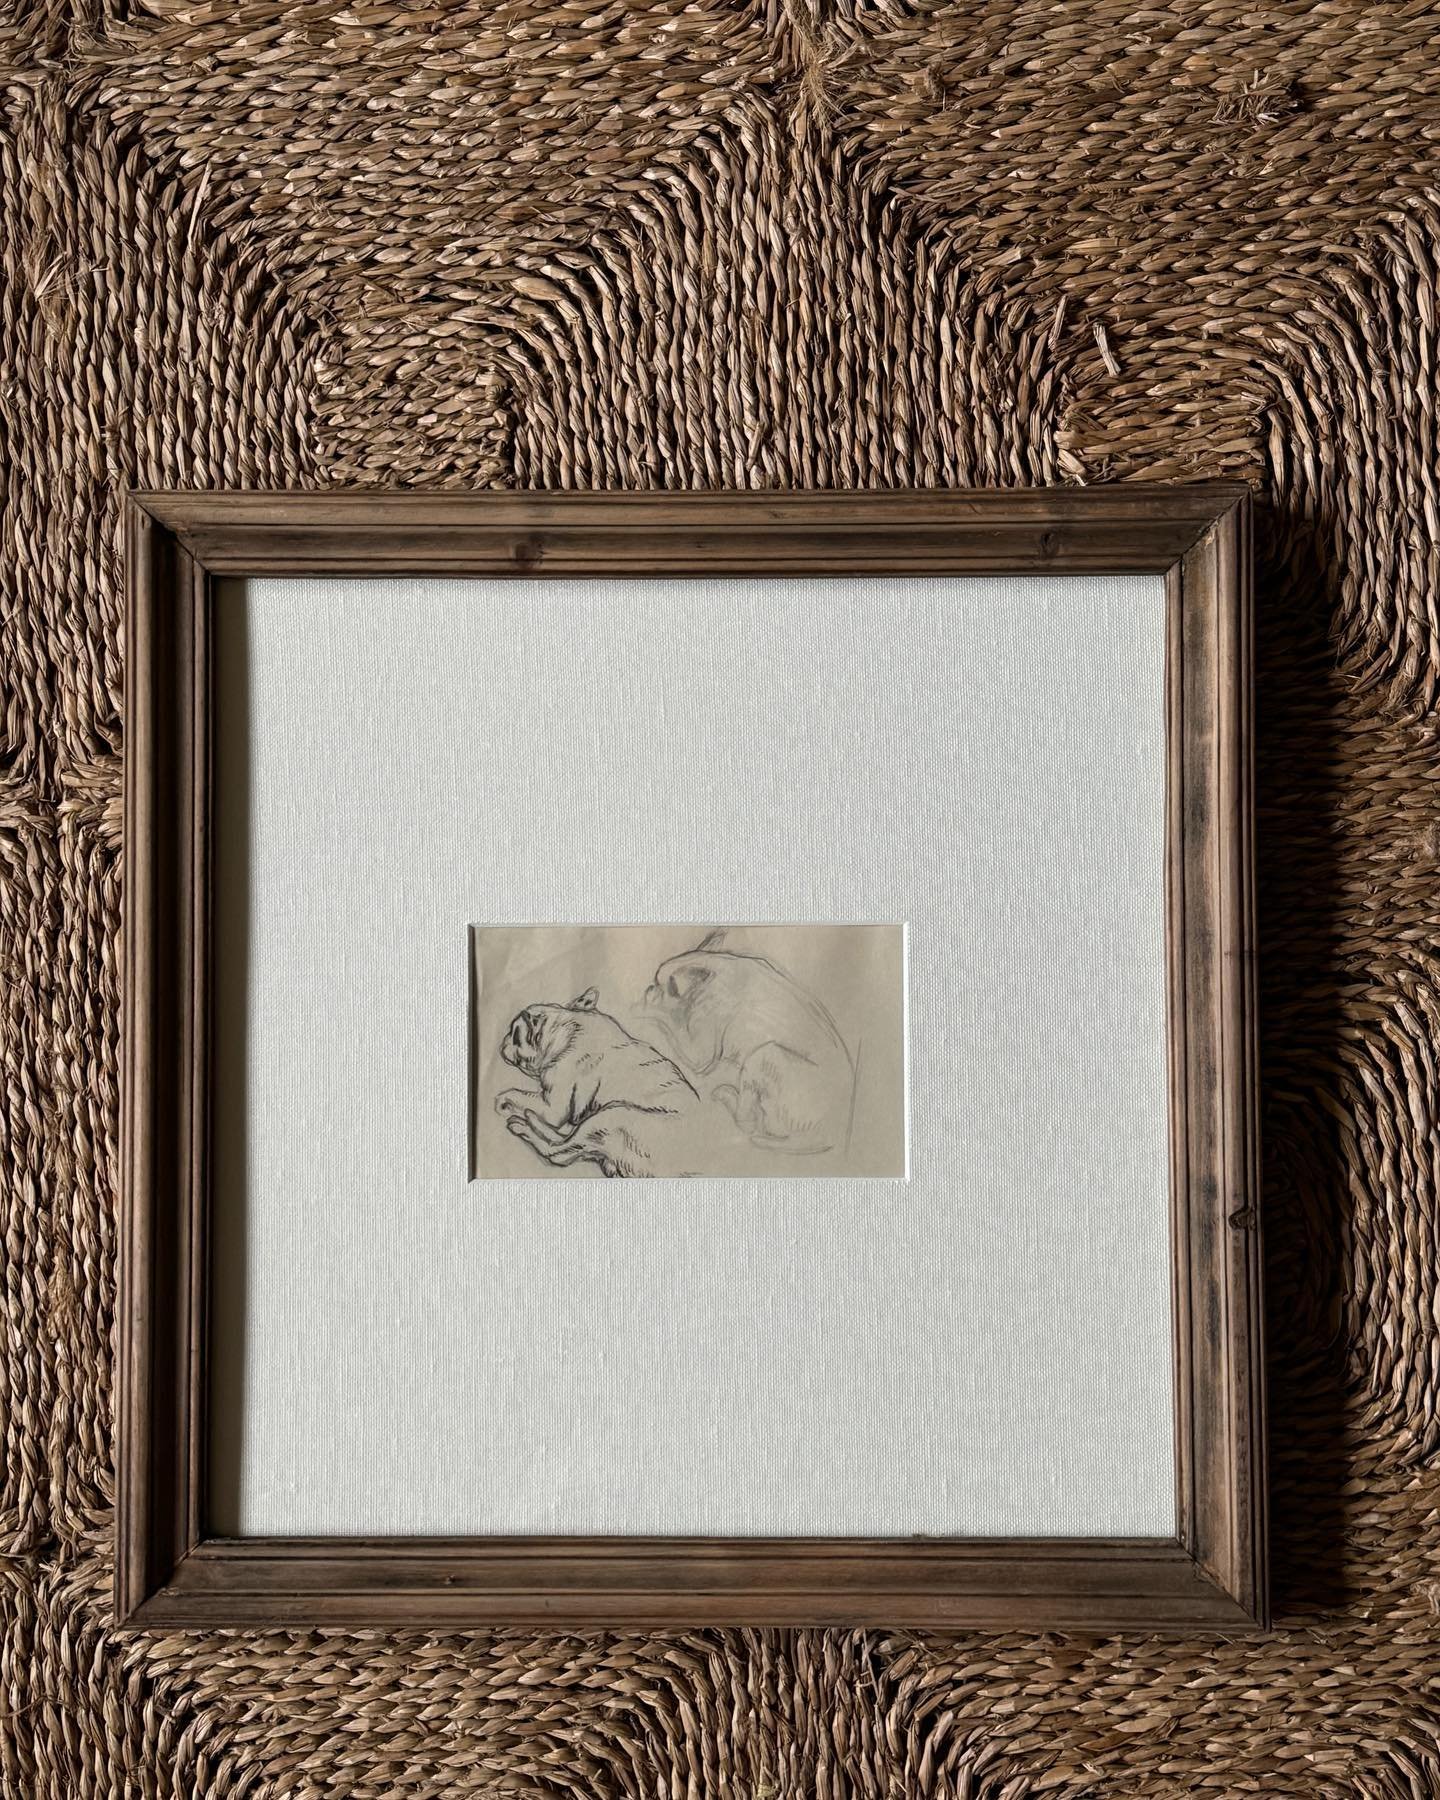 Available 🟢 this one if for my Frenchie lovers! A very sweet original pen and pencil sketch of two frenchies sleeping. It is a 1910s Spanish piece. Newly mounted in a linen mat and vintage British frame, this piece is a beautiful textural neutral.

